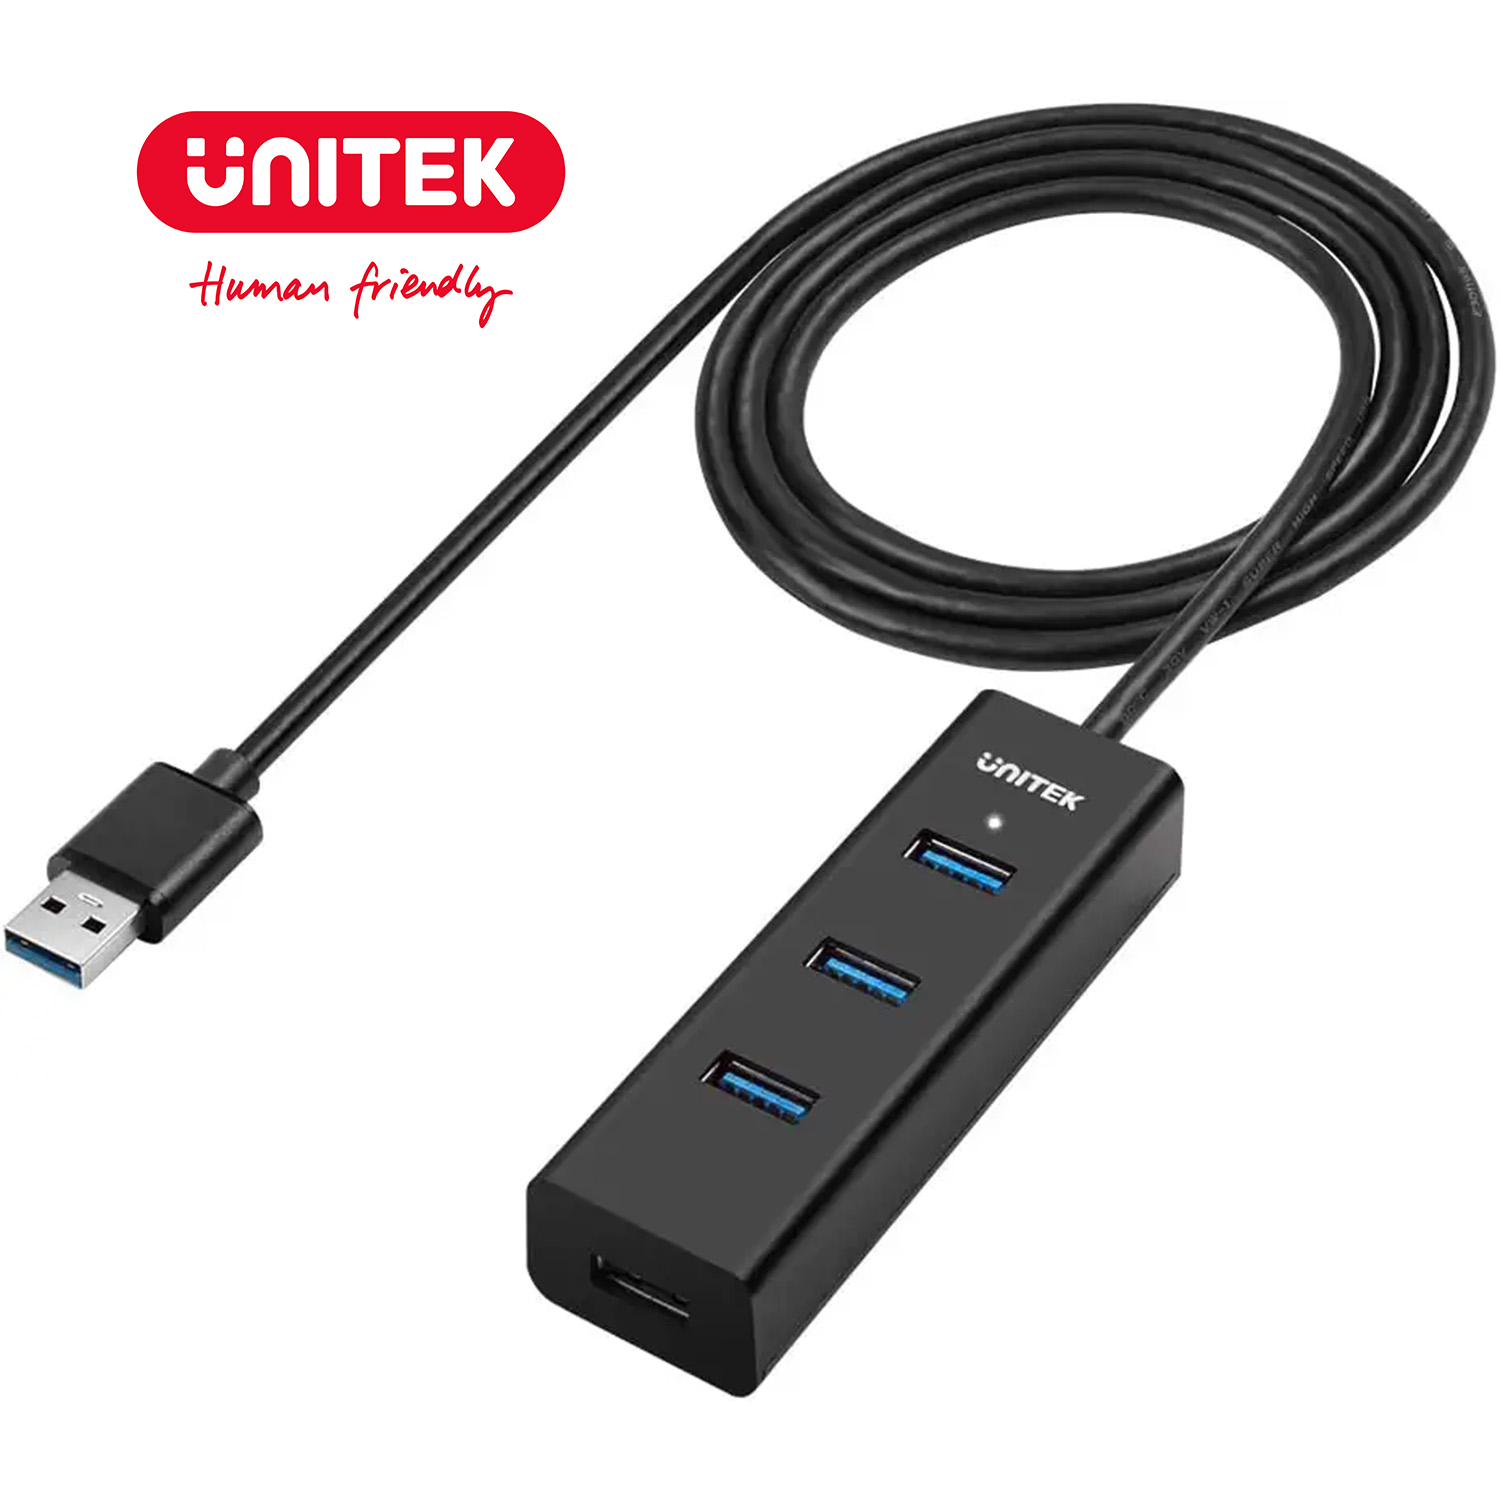 Unitek 4-Port USB 3.0 Hub, 4 Ft Long Cable USB Extension Multiple Port Splitter with Micro USB Charging Port Compatible for Windows PC, Laptop,Flash Drive,Wireless Mouse Keyboard (Support Charging) - image 1 of 7